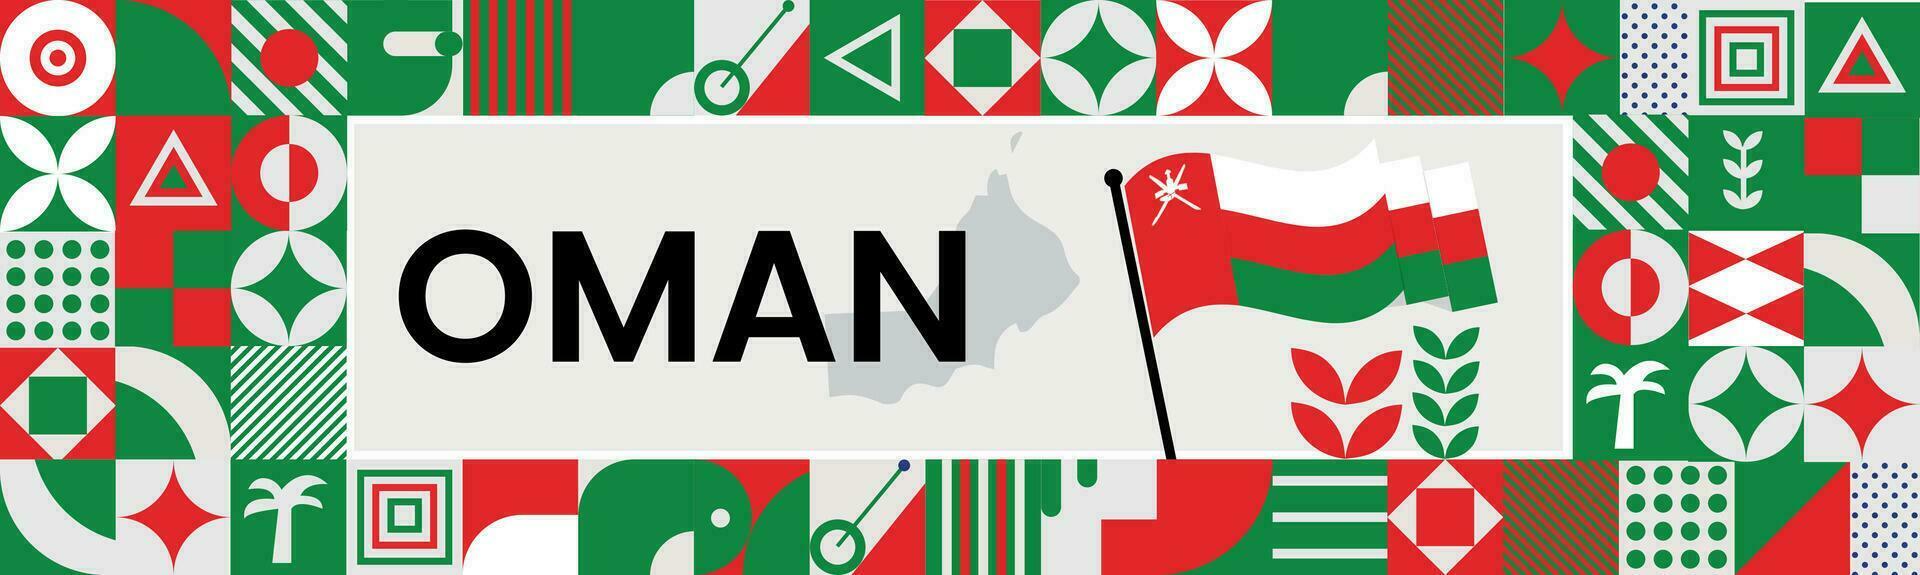 Oman national day banner with map, flag colors theme background and geometric abstract retro modern colorfull design with raised hands or fists. vector